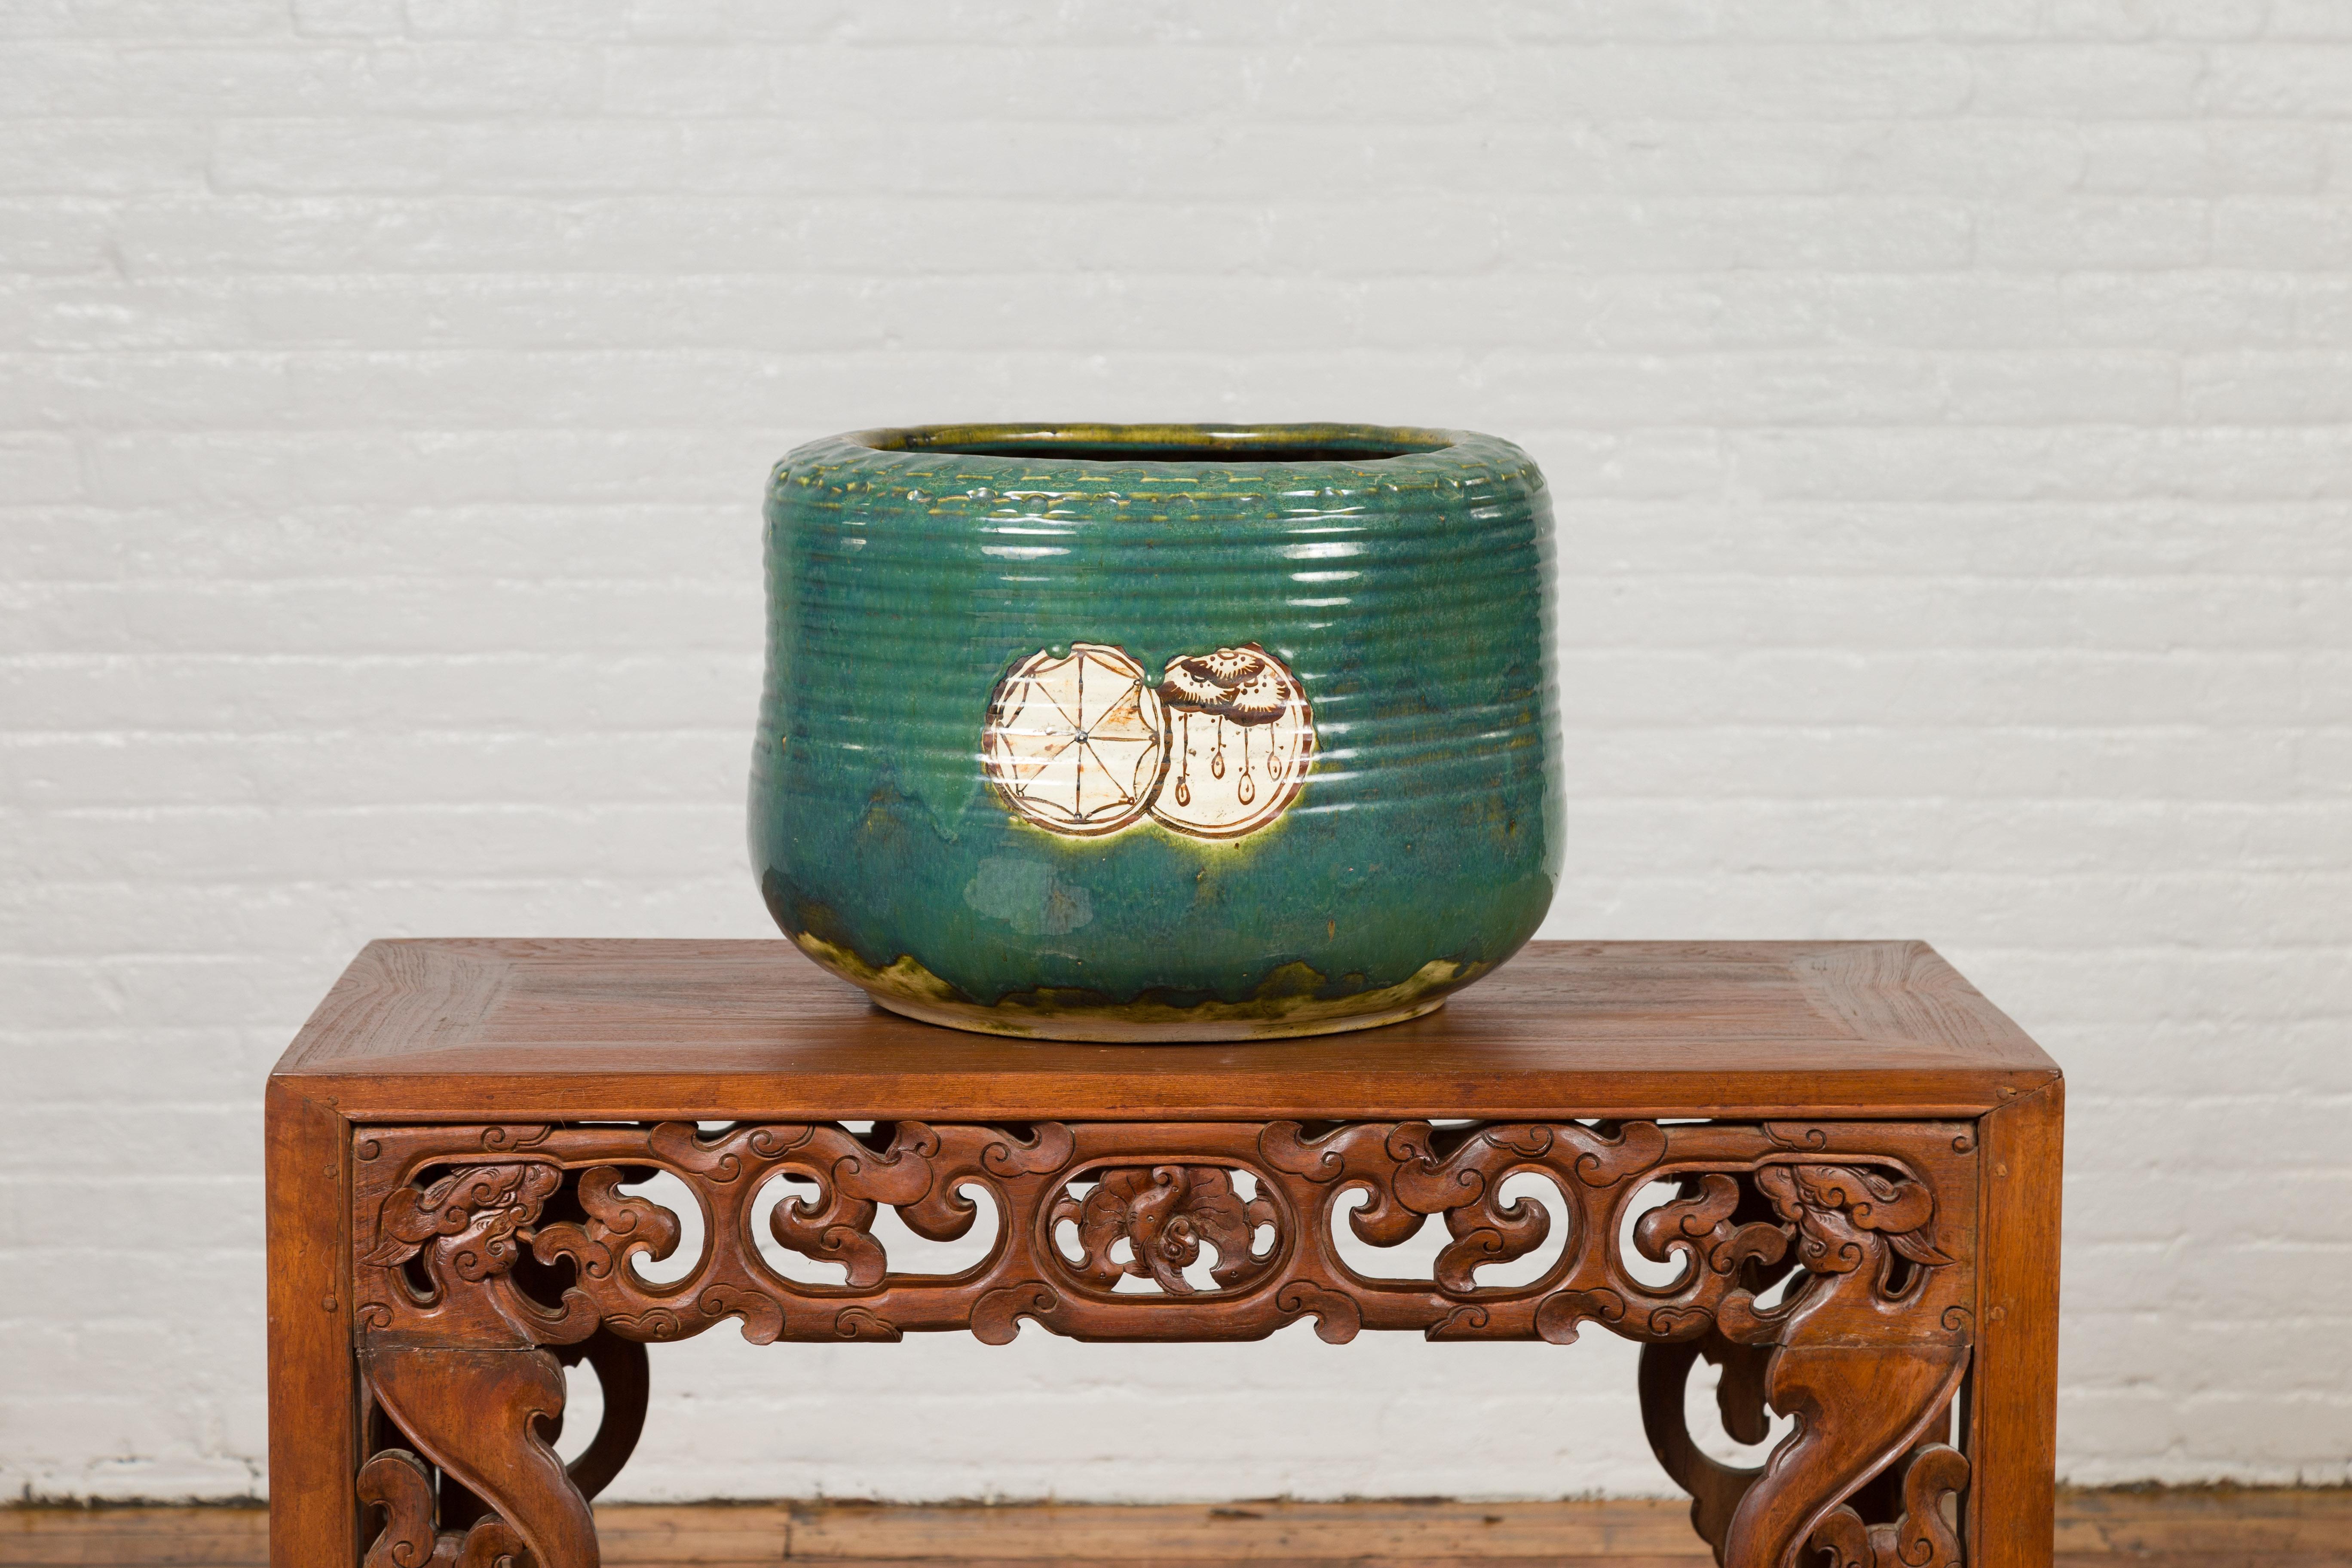 An antique Japanese Meiji period round Oribe planter from the 19th century, with decorative motifs. Created in Japan during the Meiji period, this 19th century planter draws our attention with its yellow and green Oribe glaze perfectly contrasted by